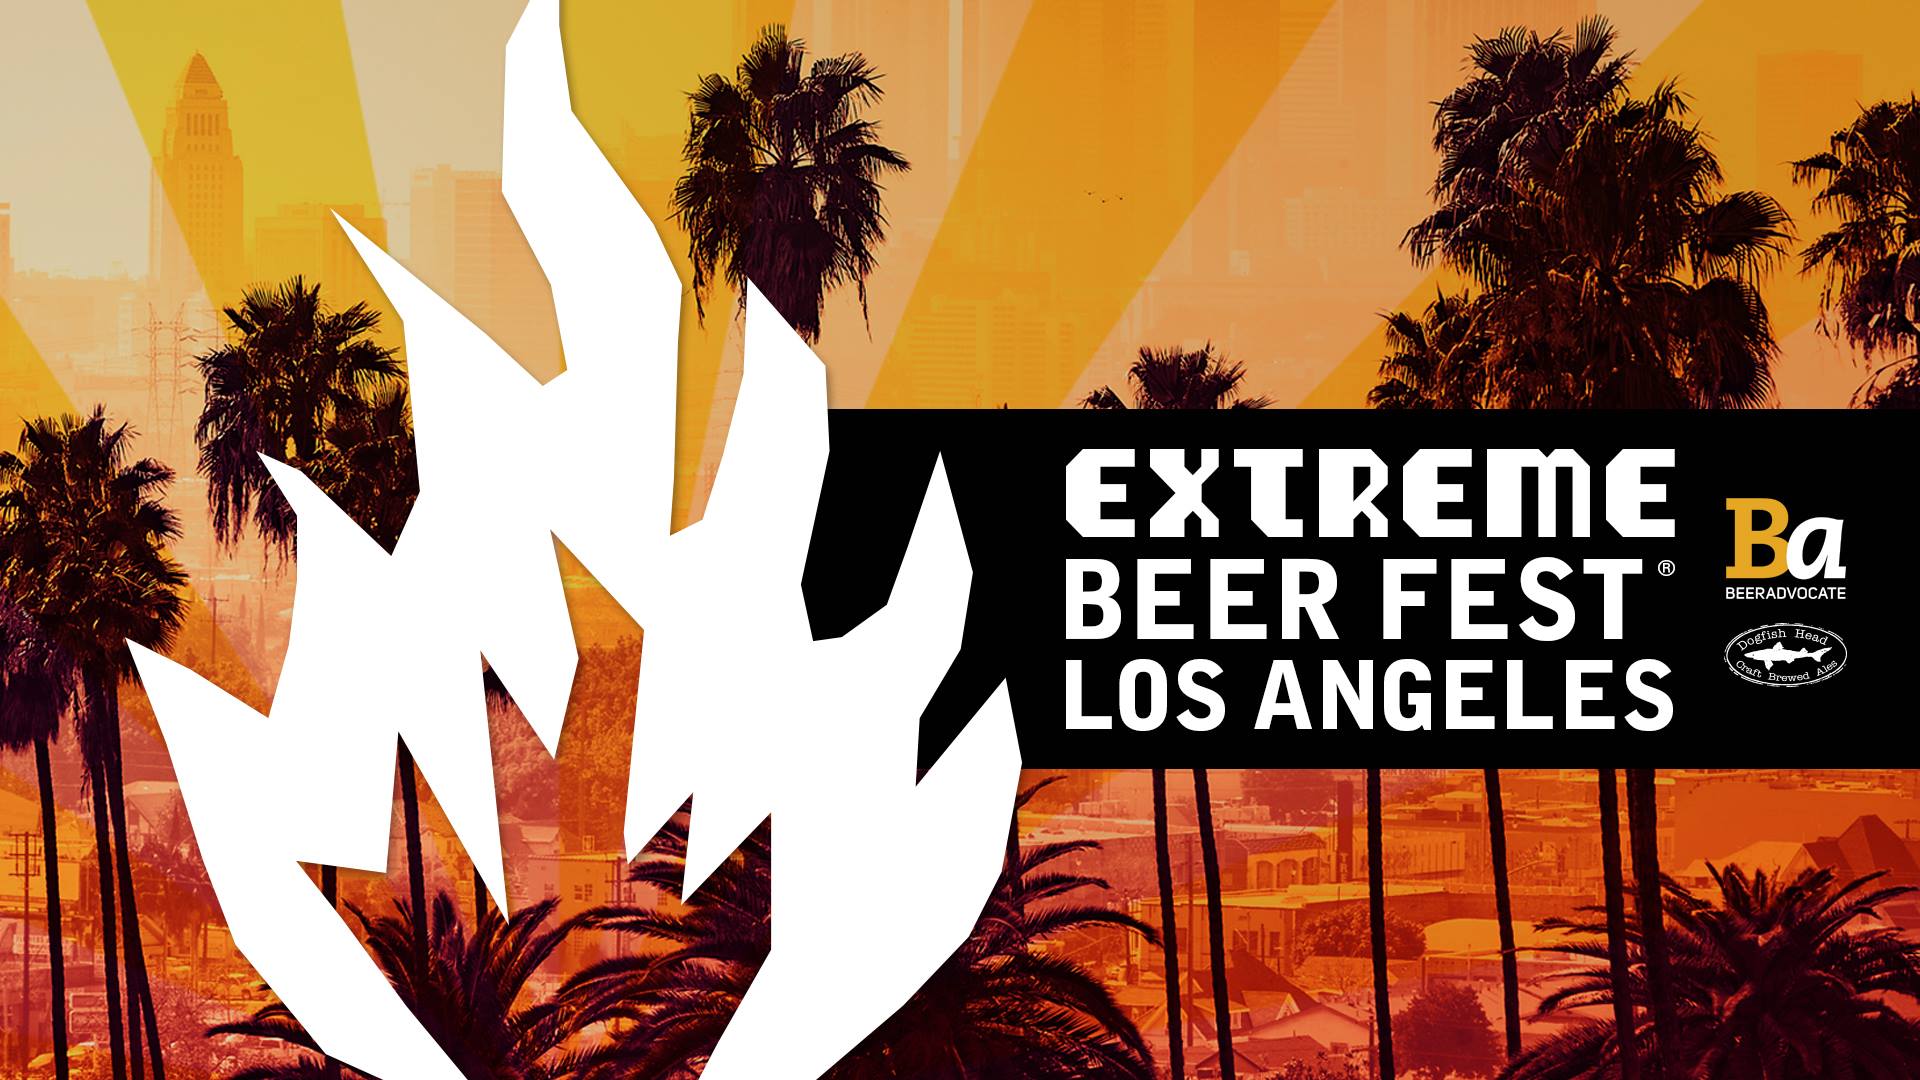 BeerAdvocate Extreme Beer Fest Announces Brewery & Beer List